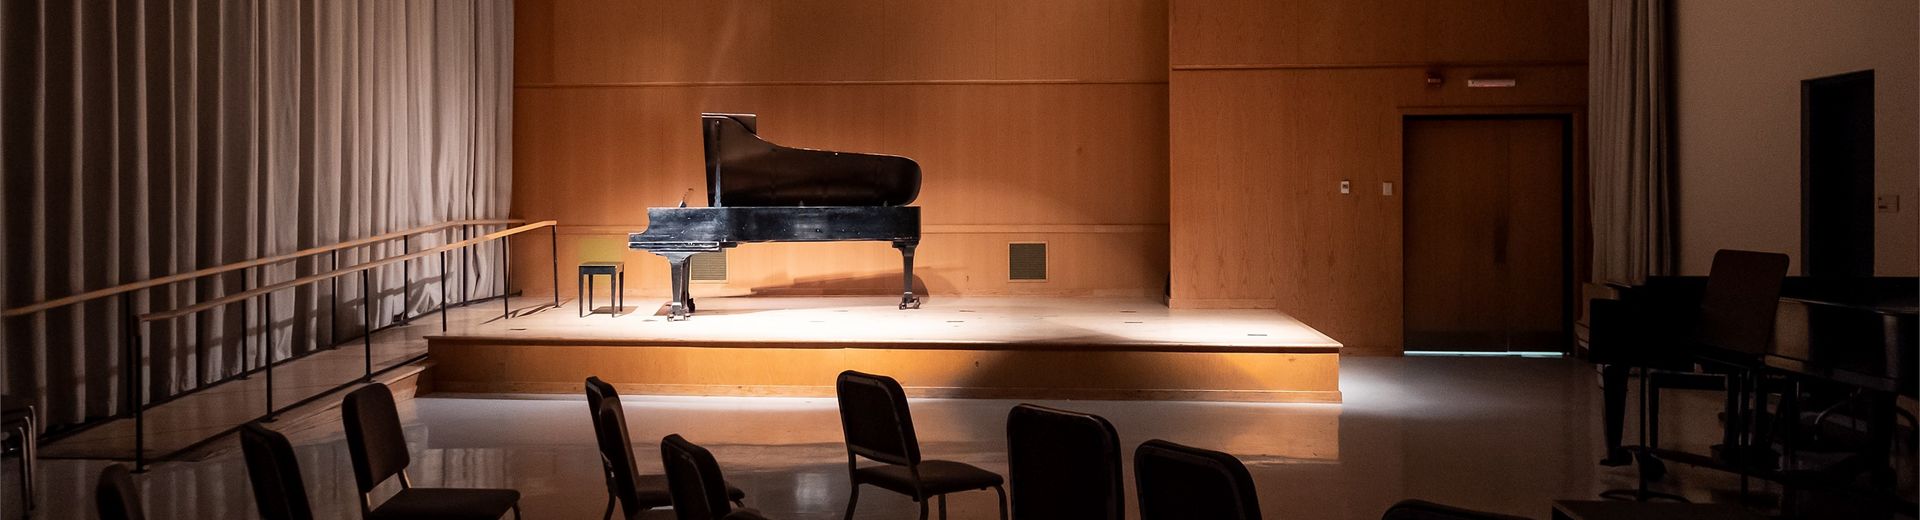 A piano sits on a stage with low lighting.